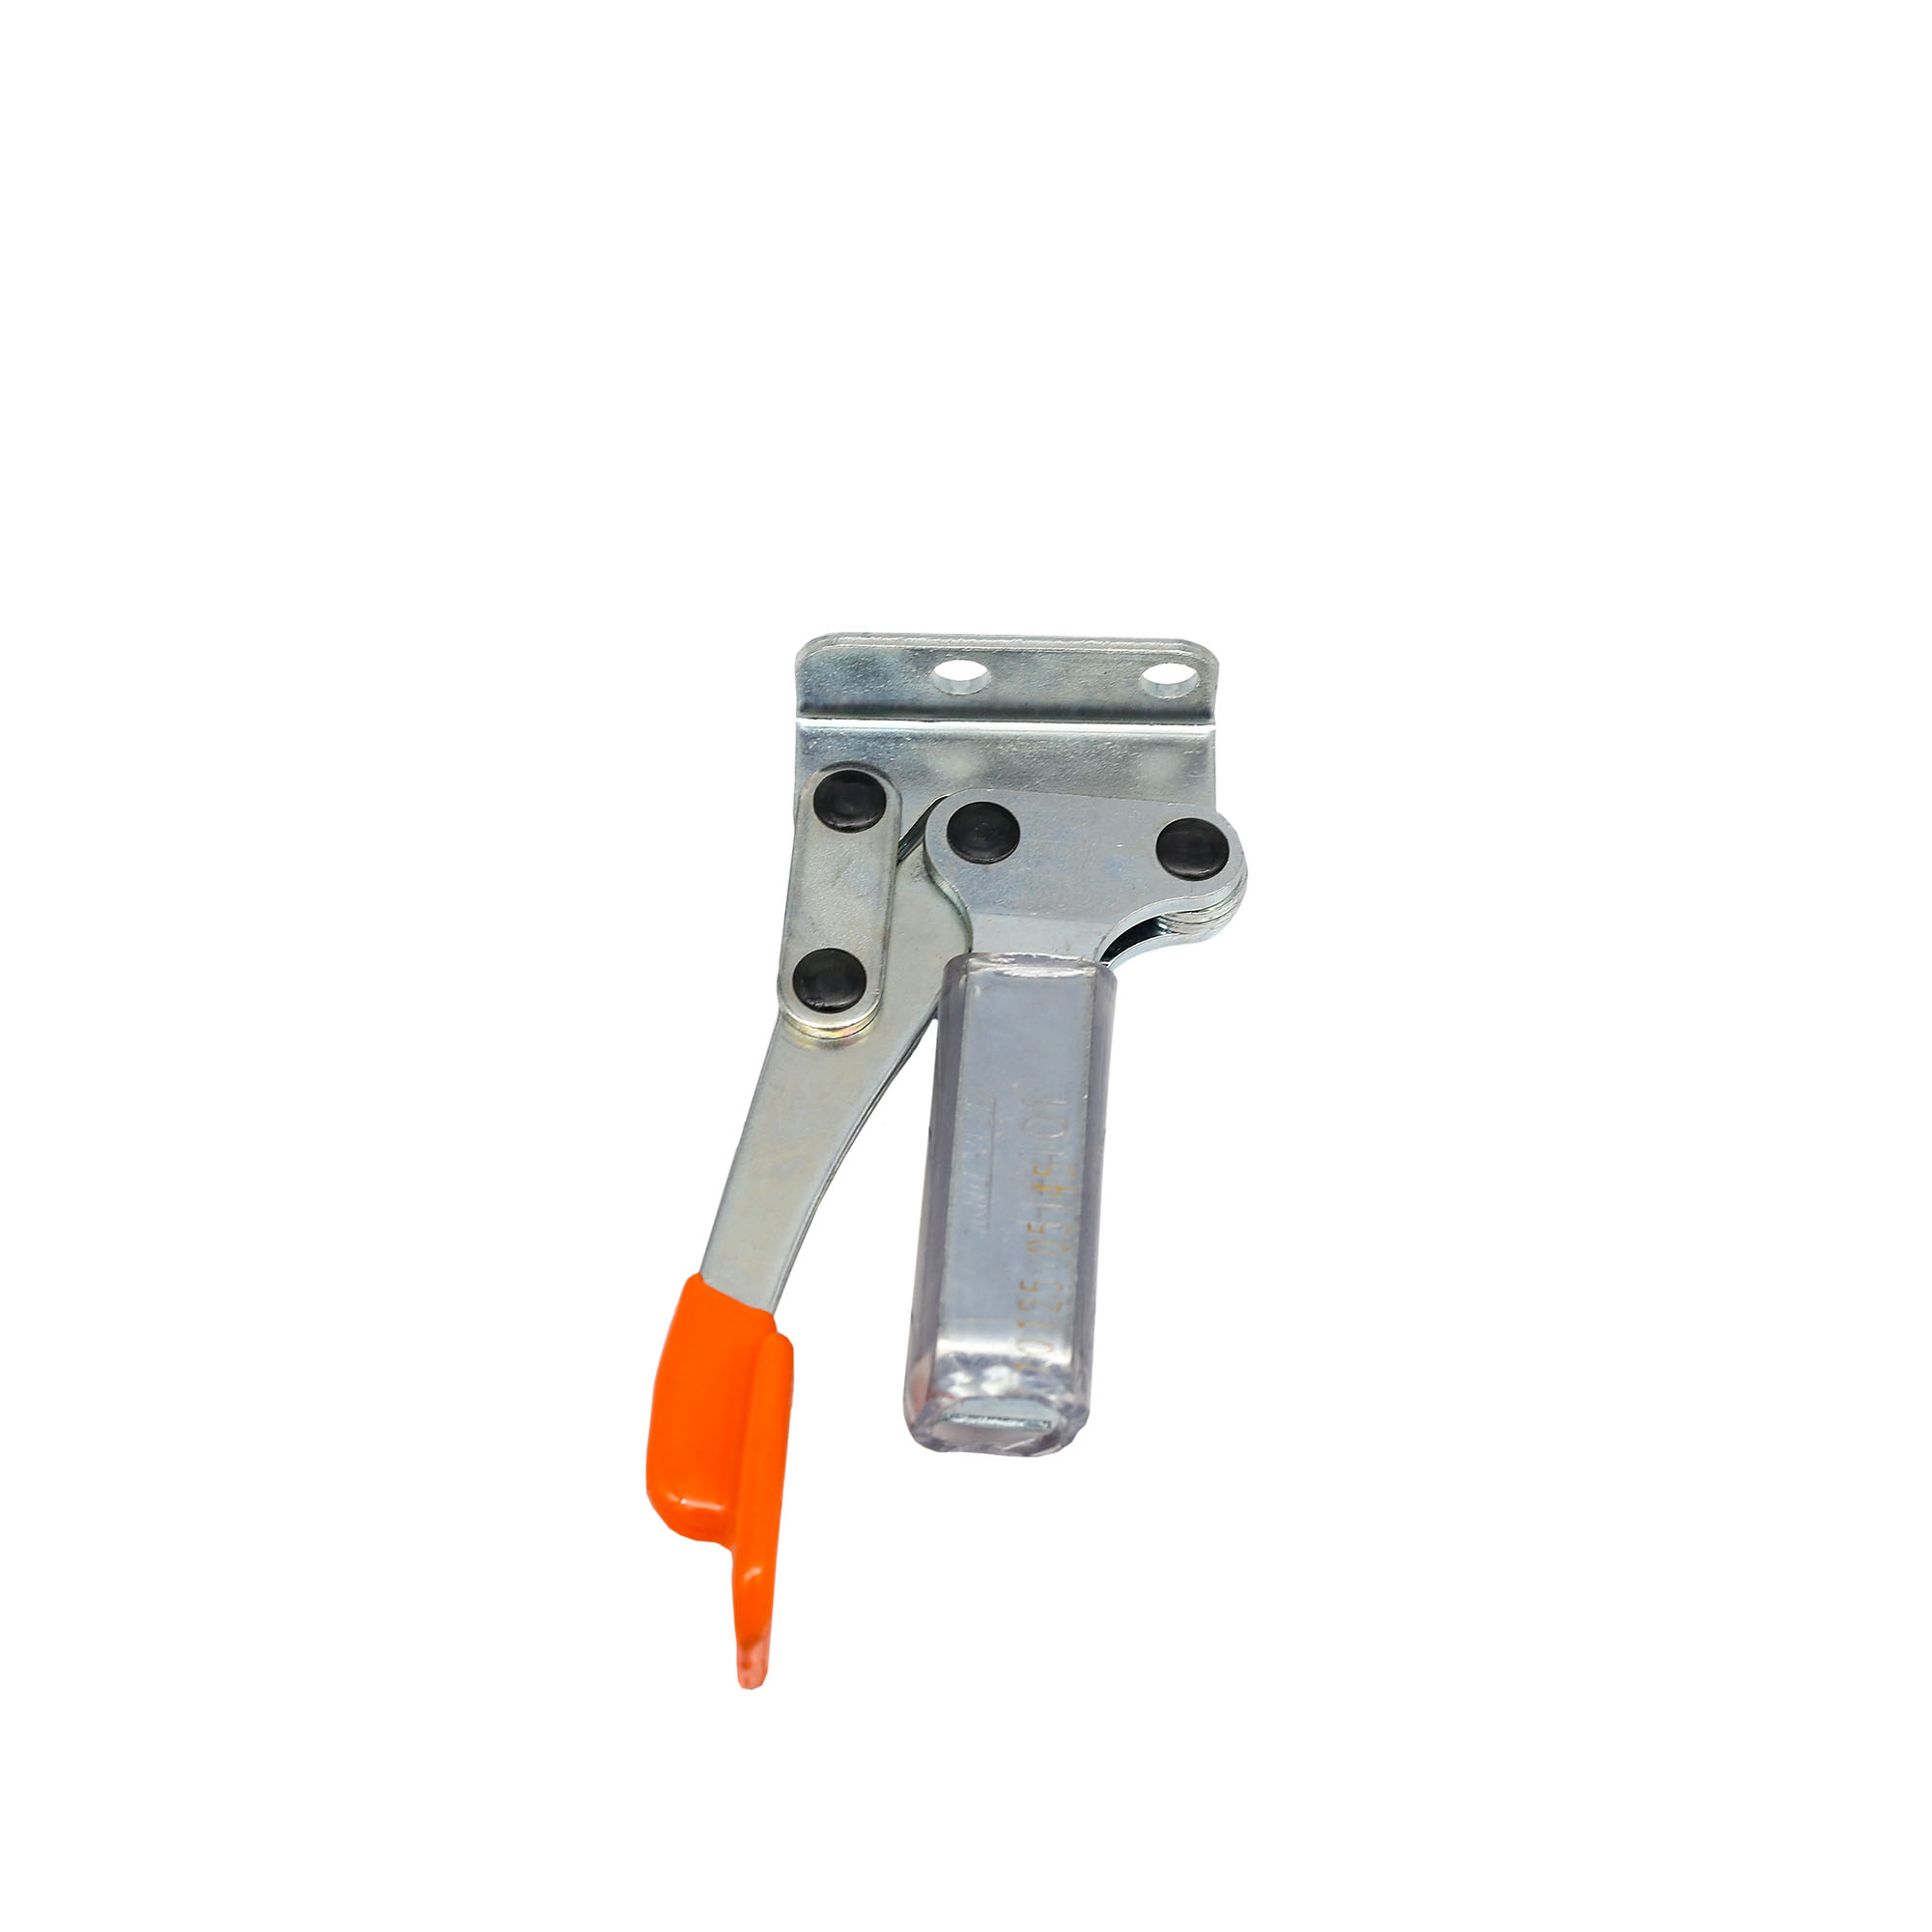 Parts Washer Replacement Parts, Parts & Accessories, Latch Clamp, 1743 Latch Clamp, American Hawk Industrial, Dee-Blast